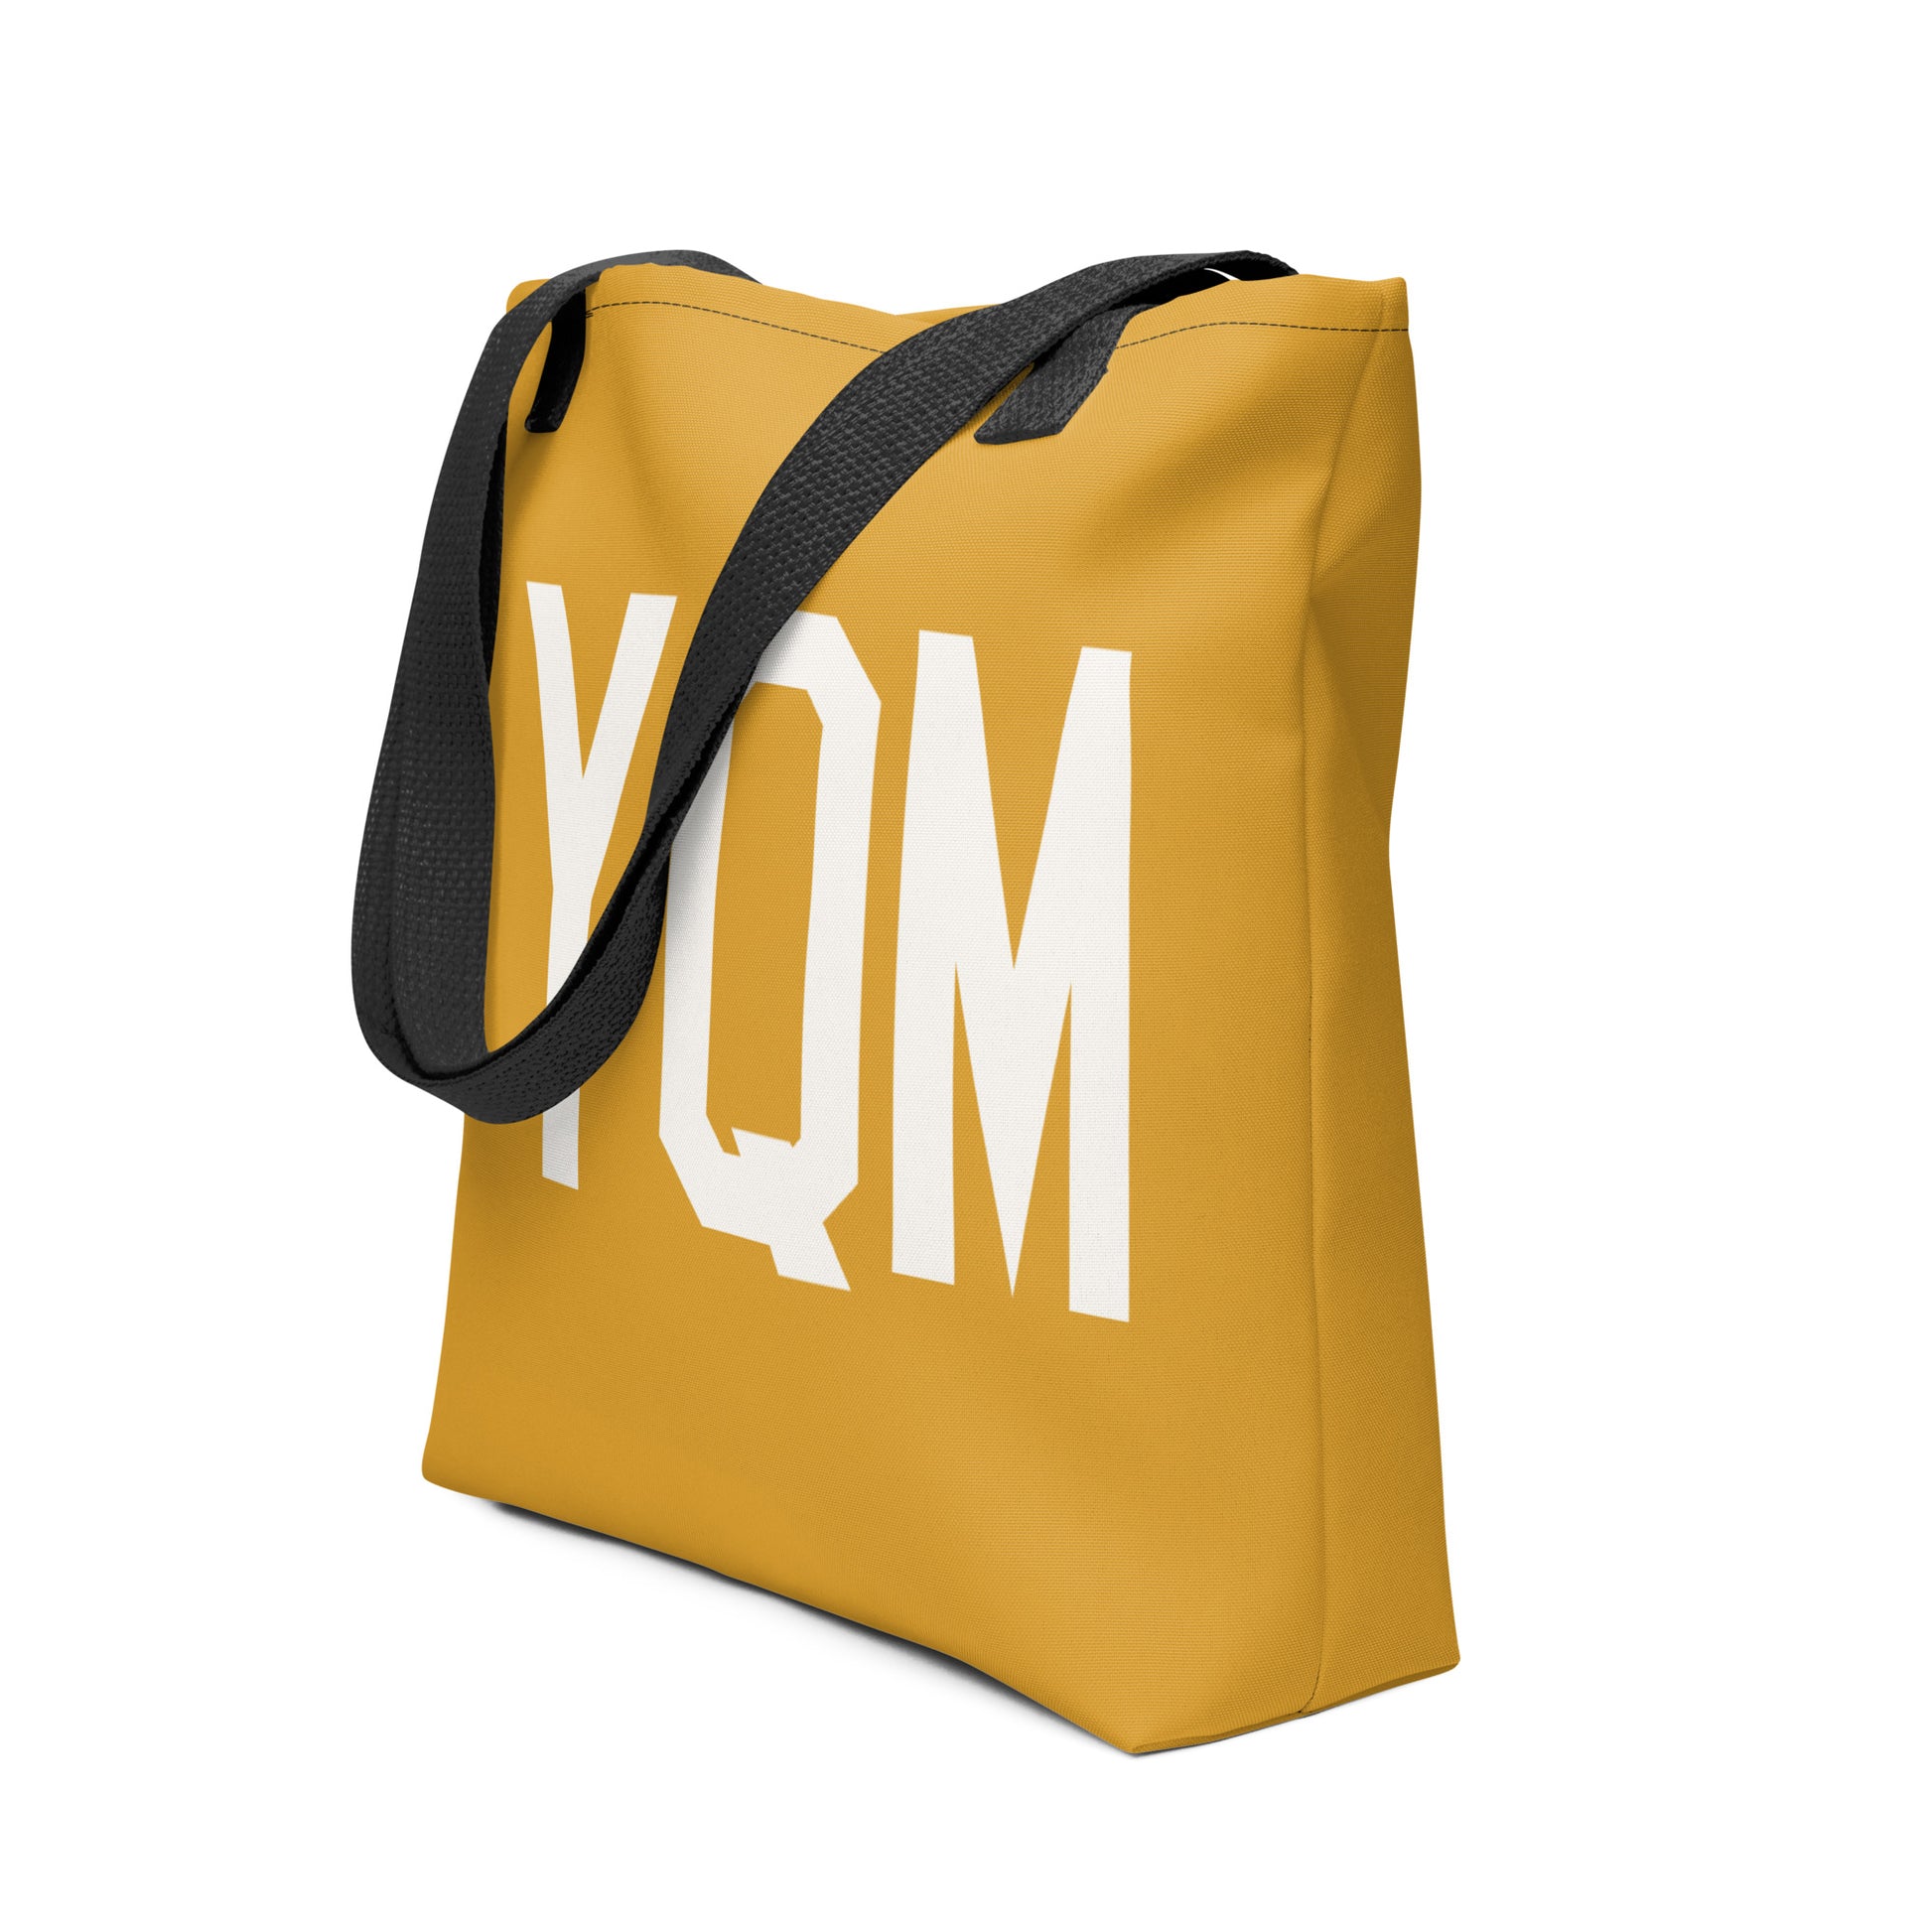 Aviation Gift Tote Bag - Buttercup • YQM Moncton • YHM Designs - Image 05